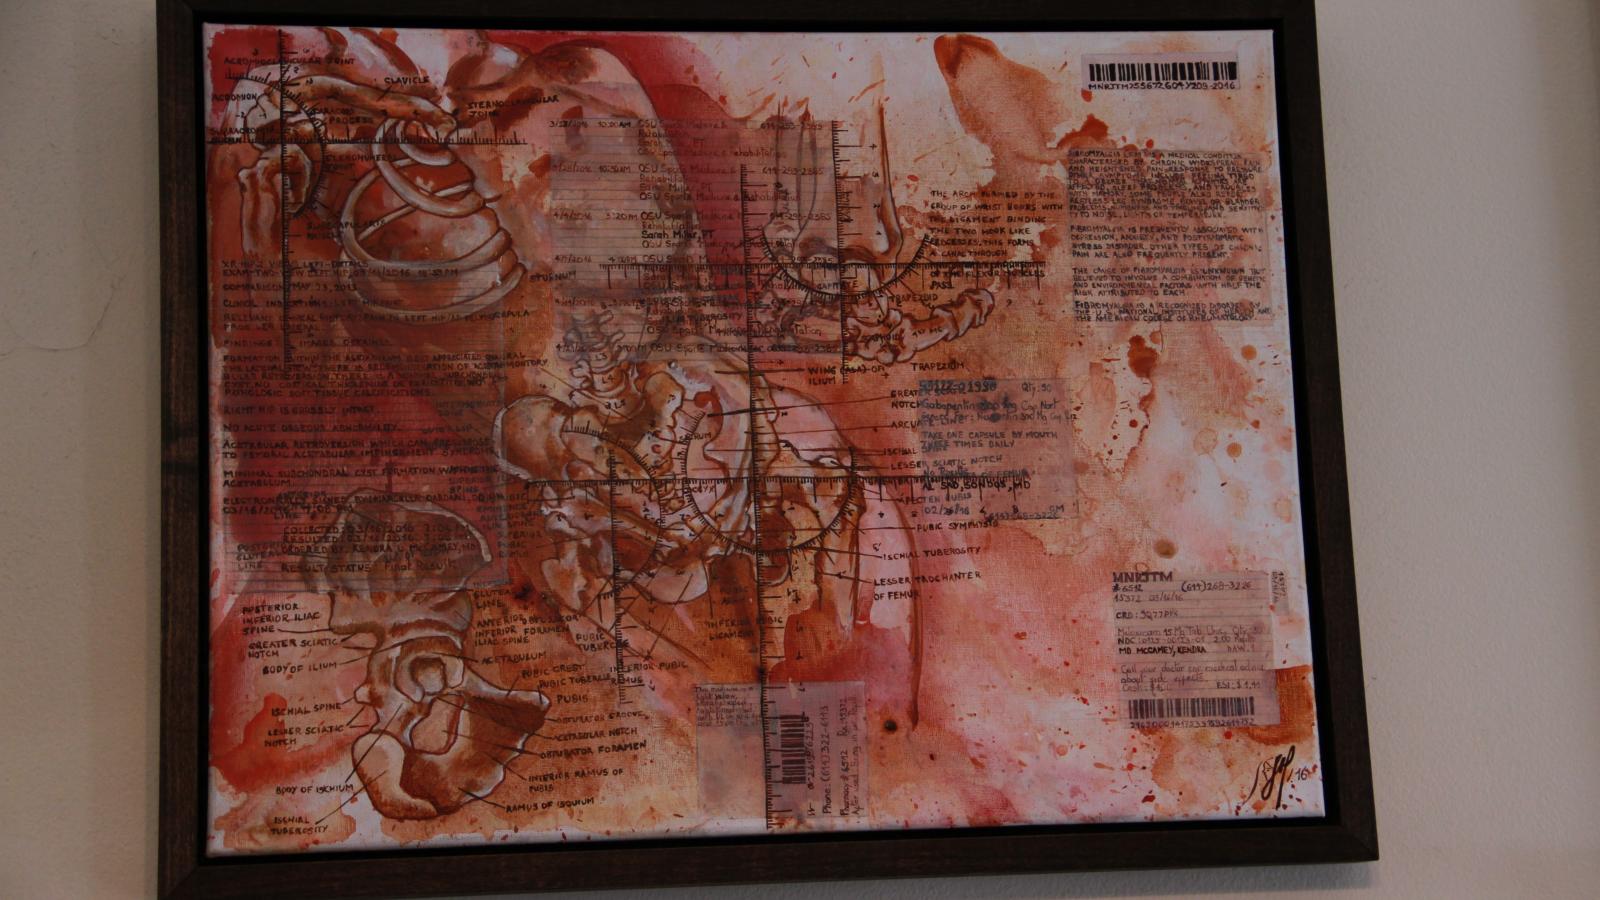 Manrique's mixed media medical paintings